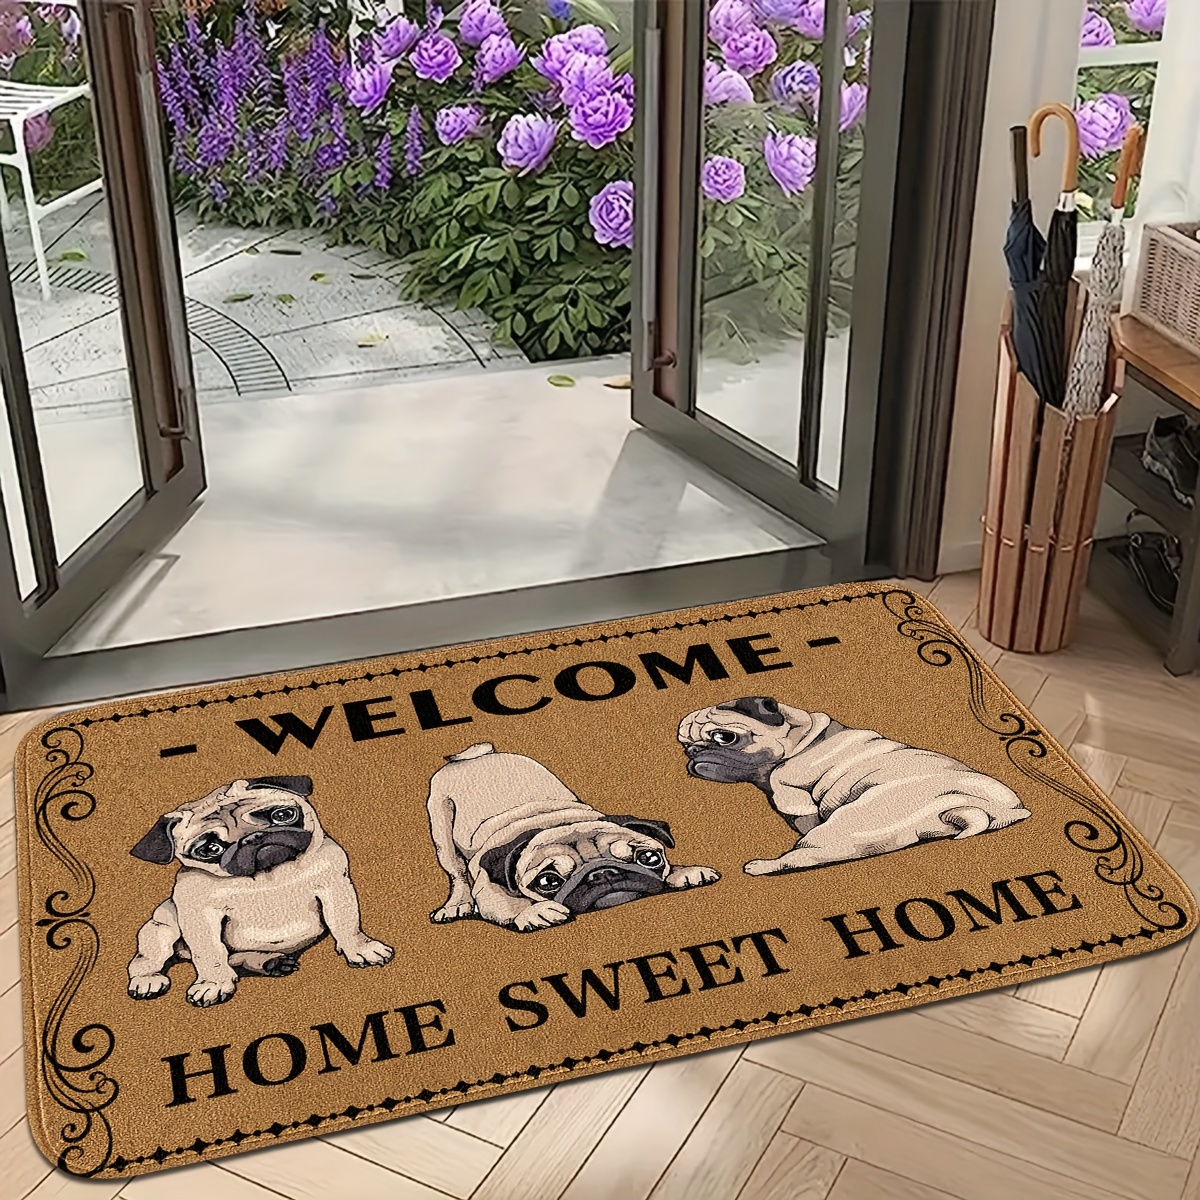 

Welcome Home - Pug Pals Doormat: 40cm X 60cm, Thick Fleece, Non-slip, Machine Washable, Perfect For Entryway, Kitchen, Bathroom, Or Bedroom